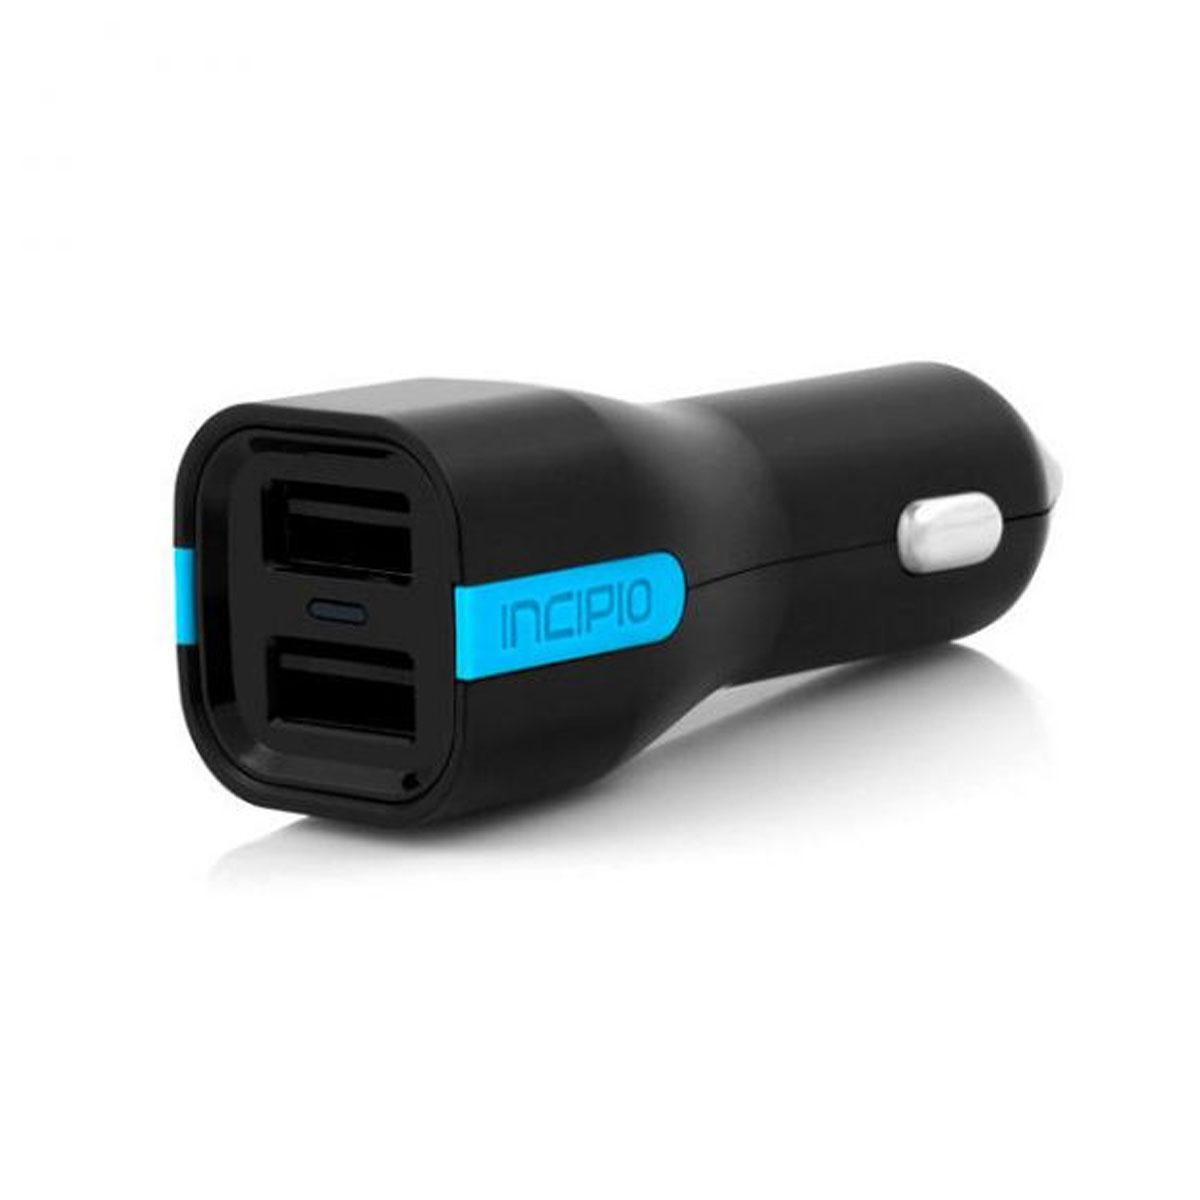 Incipio Car Charger W / Lightning Cable And USB Slot - High Speed 4.8 Amp